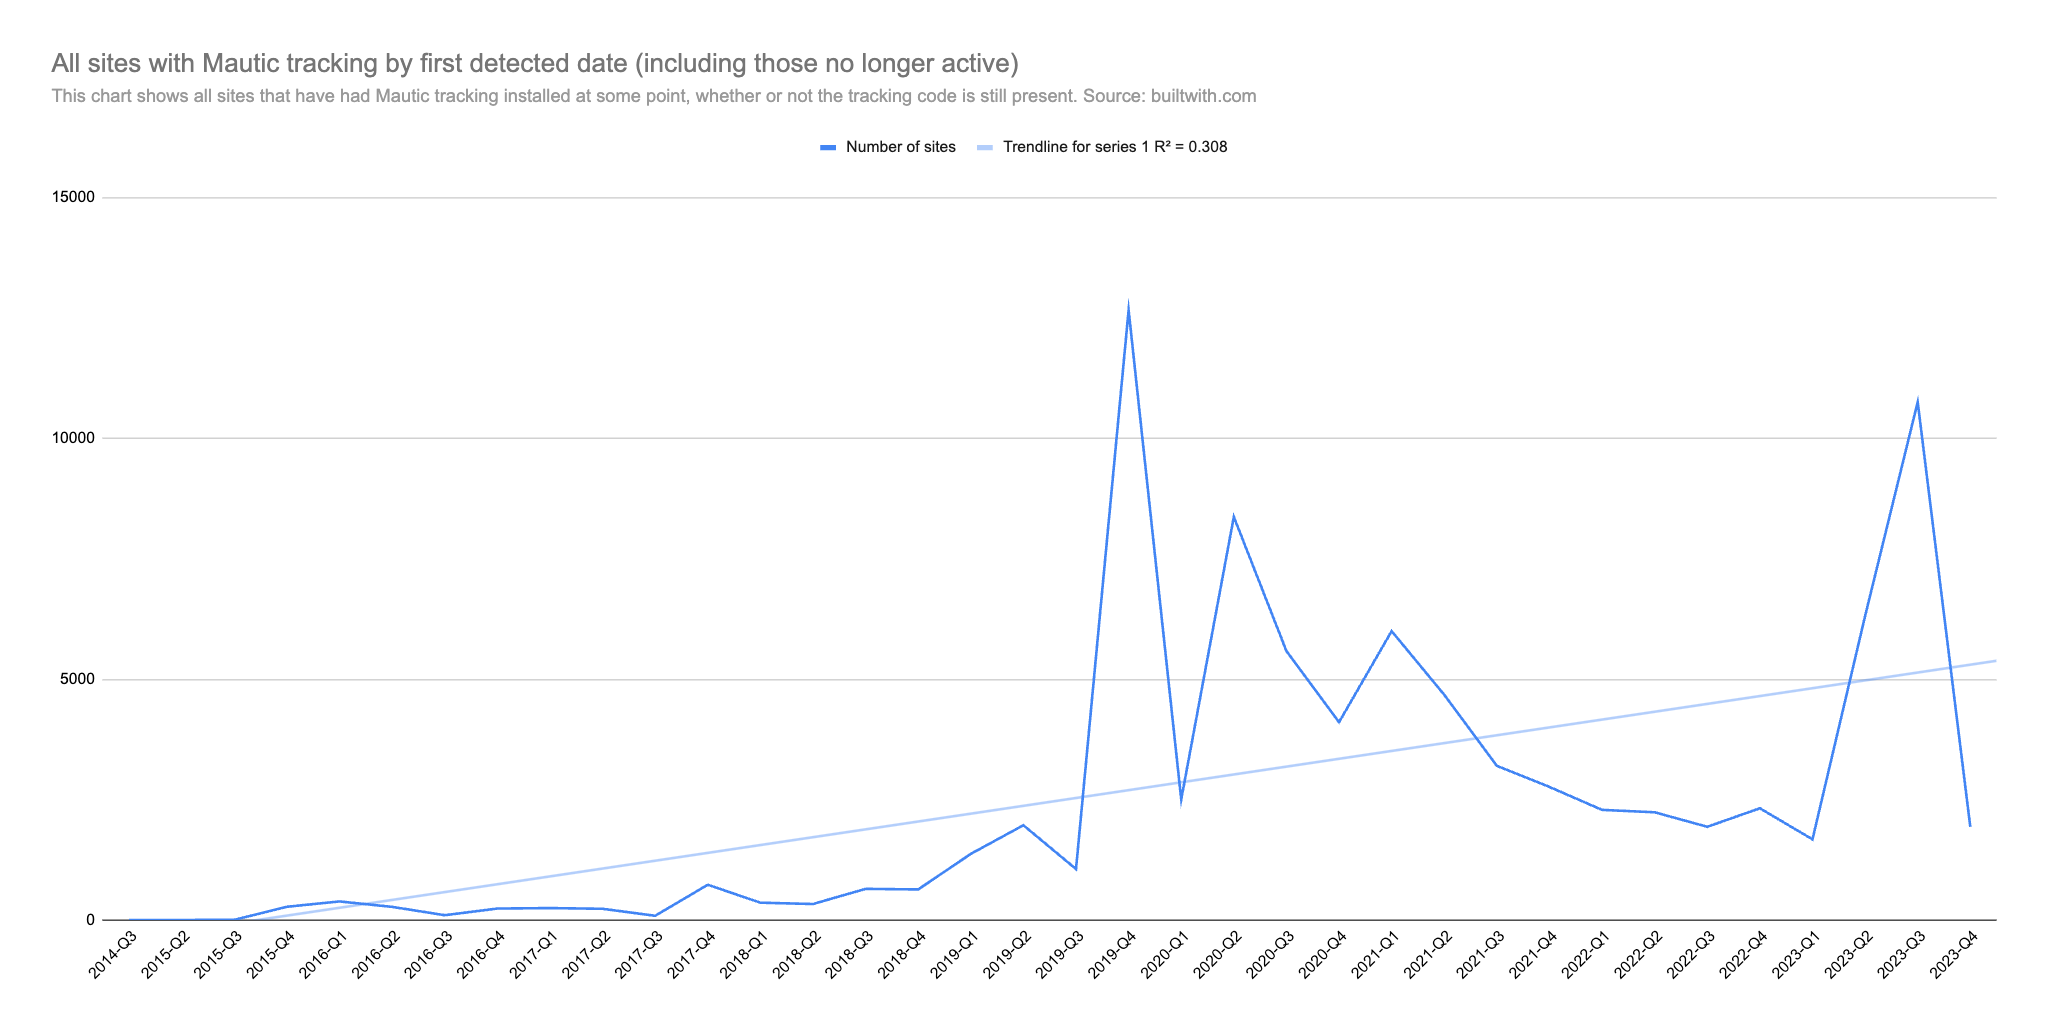 Chart showing all sites with Mautic tracking over time including those who have removed it.